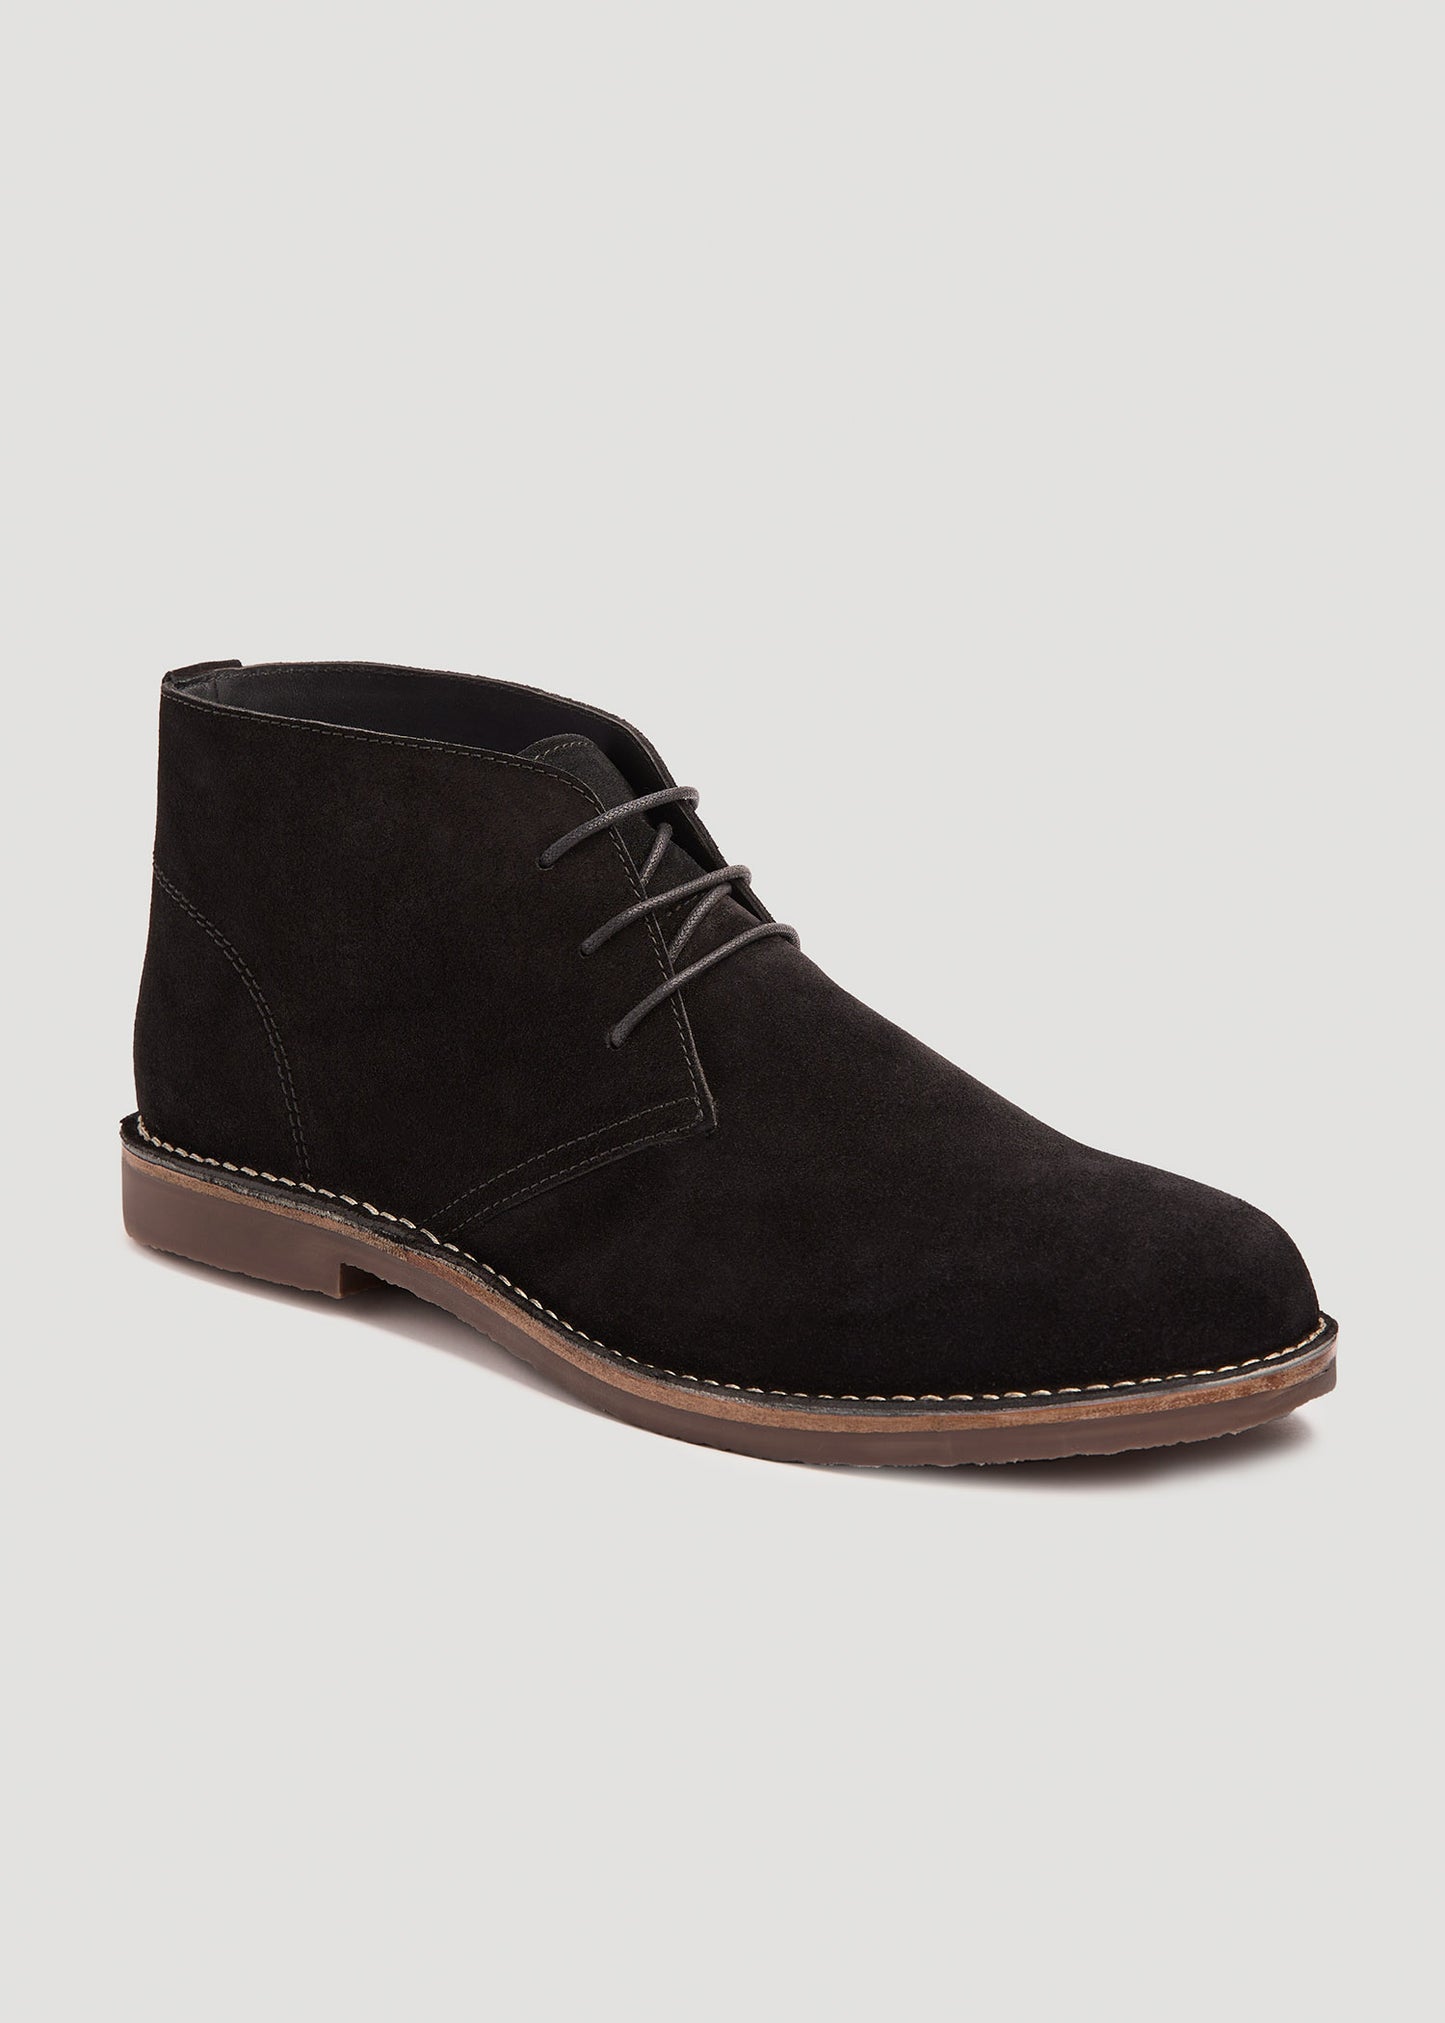 Side view of American Tall's Tall Men's Chukka Boots in Black.